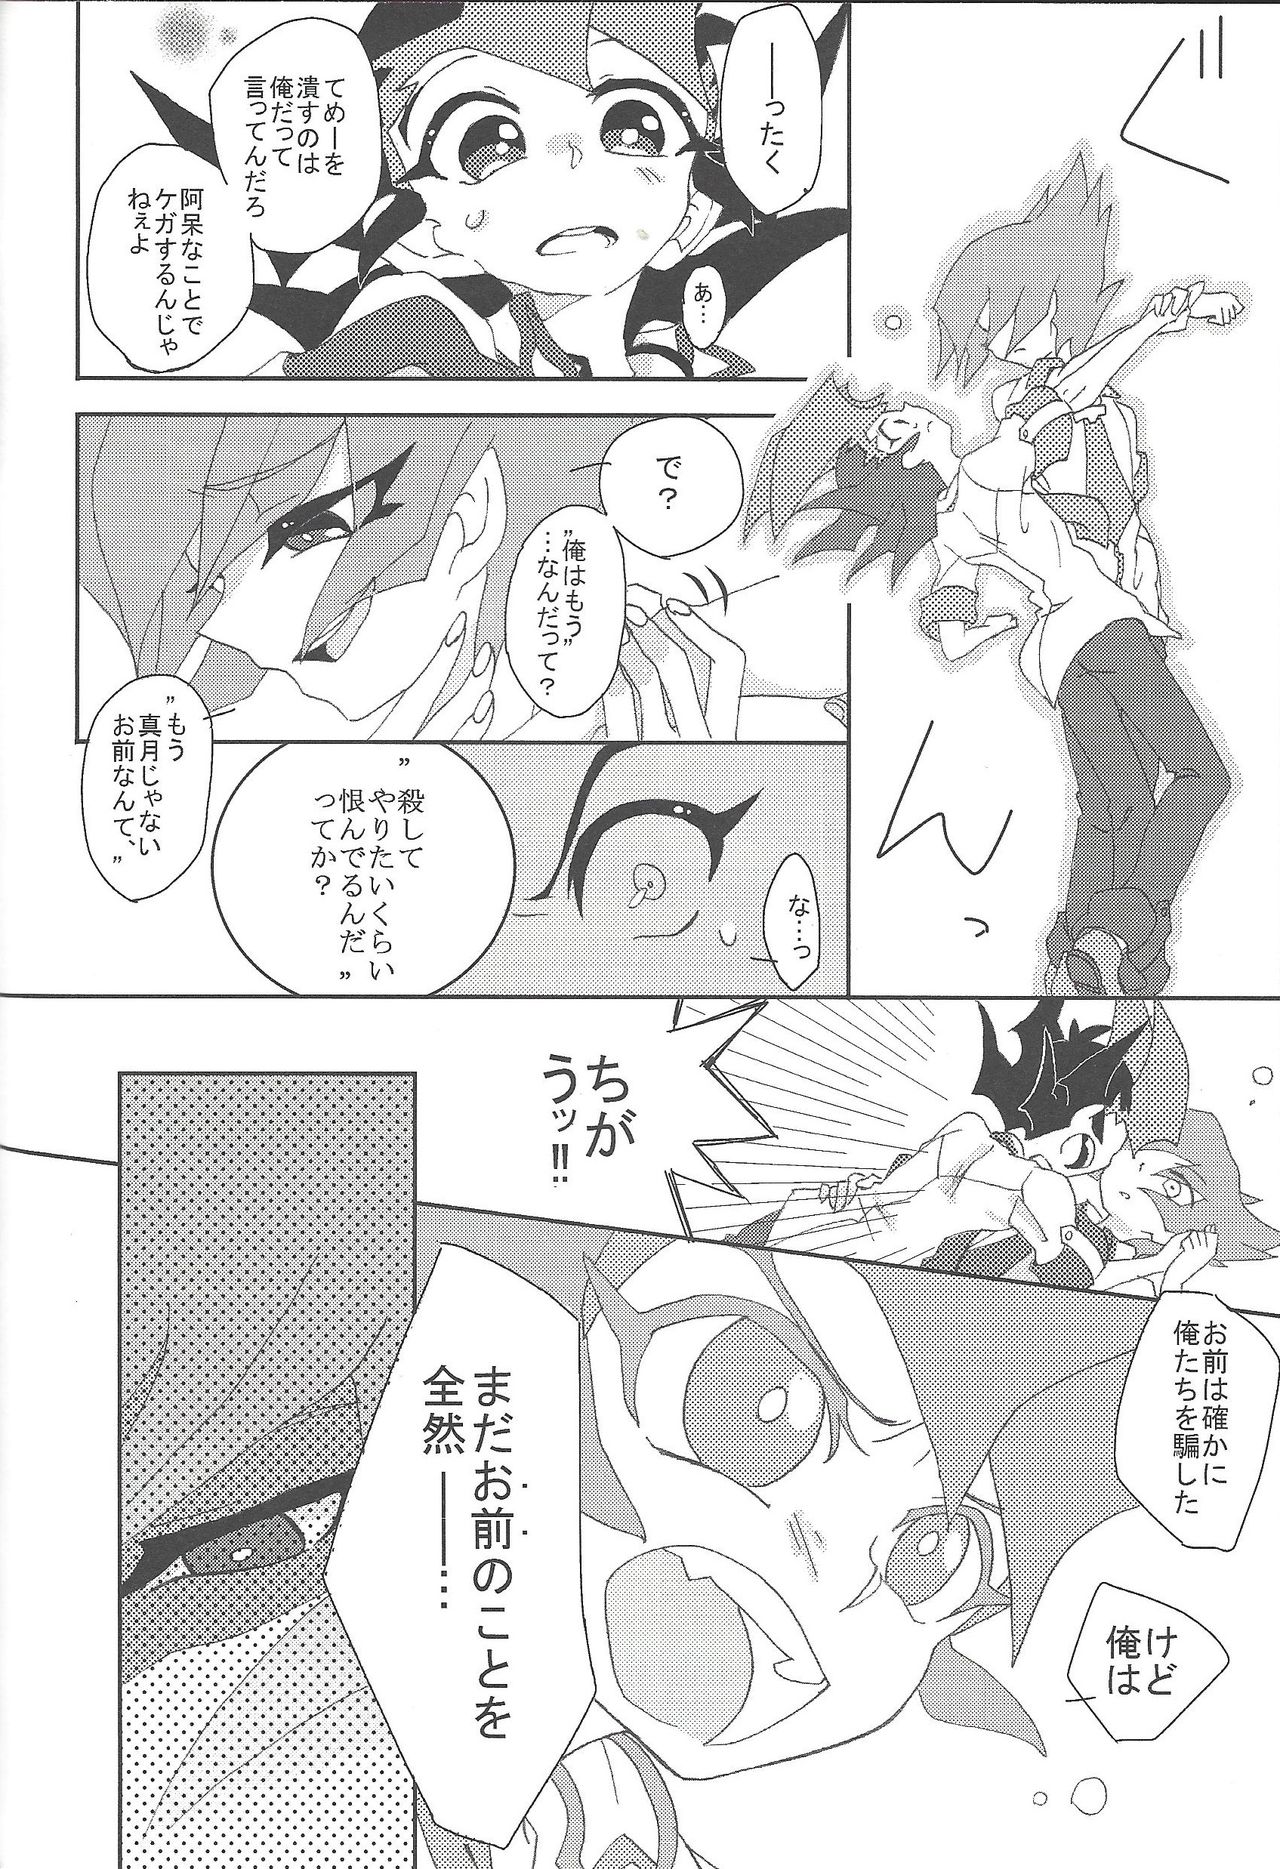 [Afternoon! (よろず)] Over ray you!! (遊☆戯☆王ZEXAL)